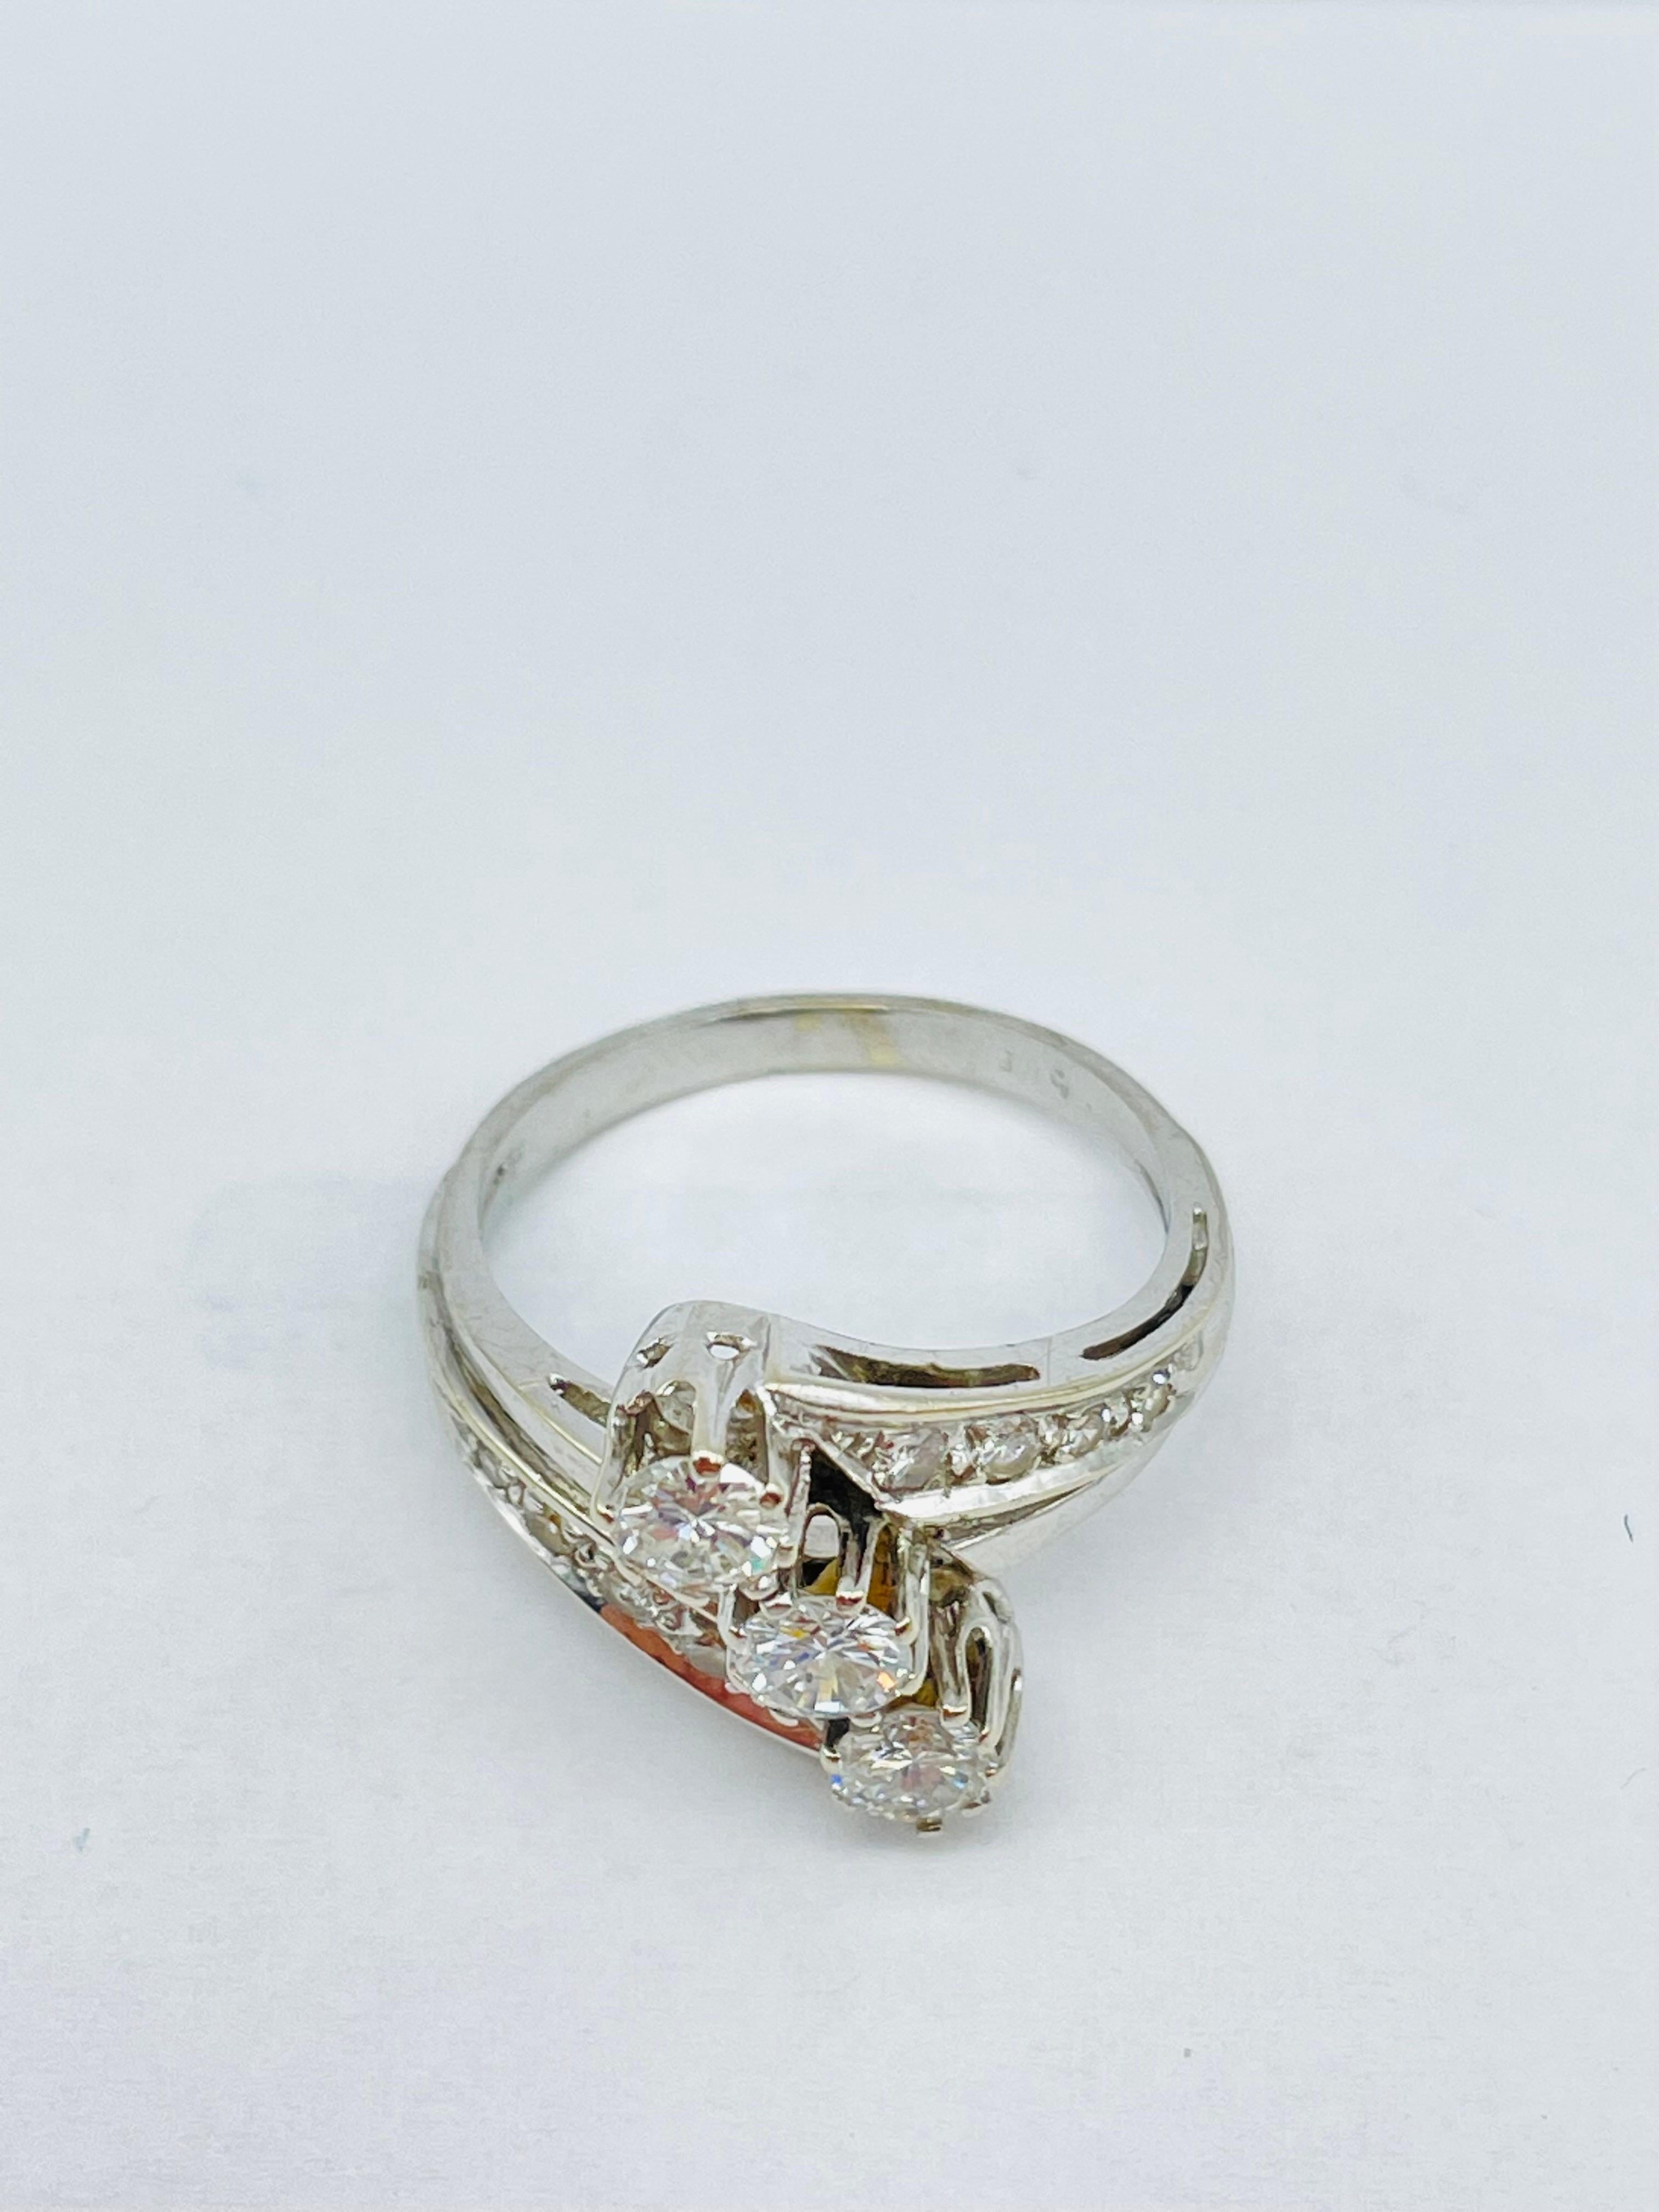 Magnificent 14k White Gold Ring with a Trio of Diamonds Each 0.25 Carat  For Sale 7